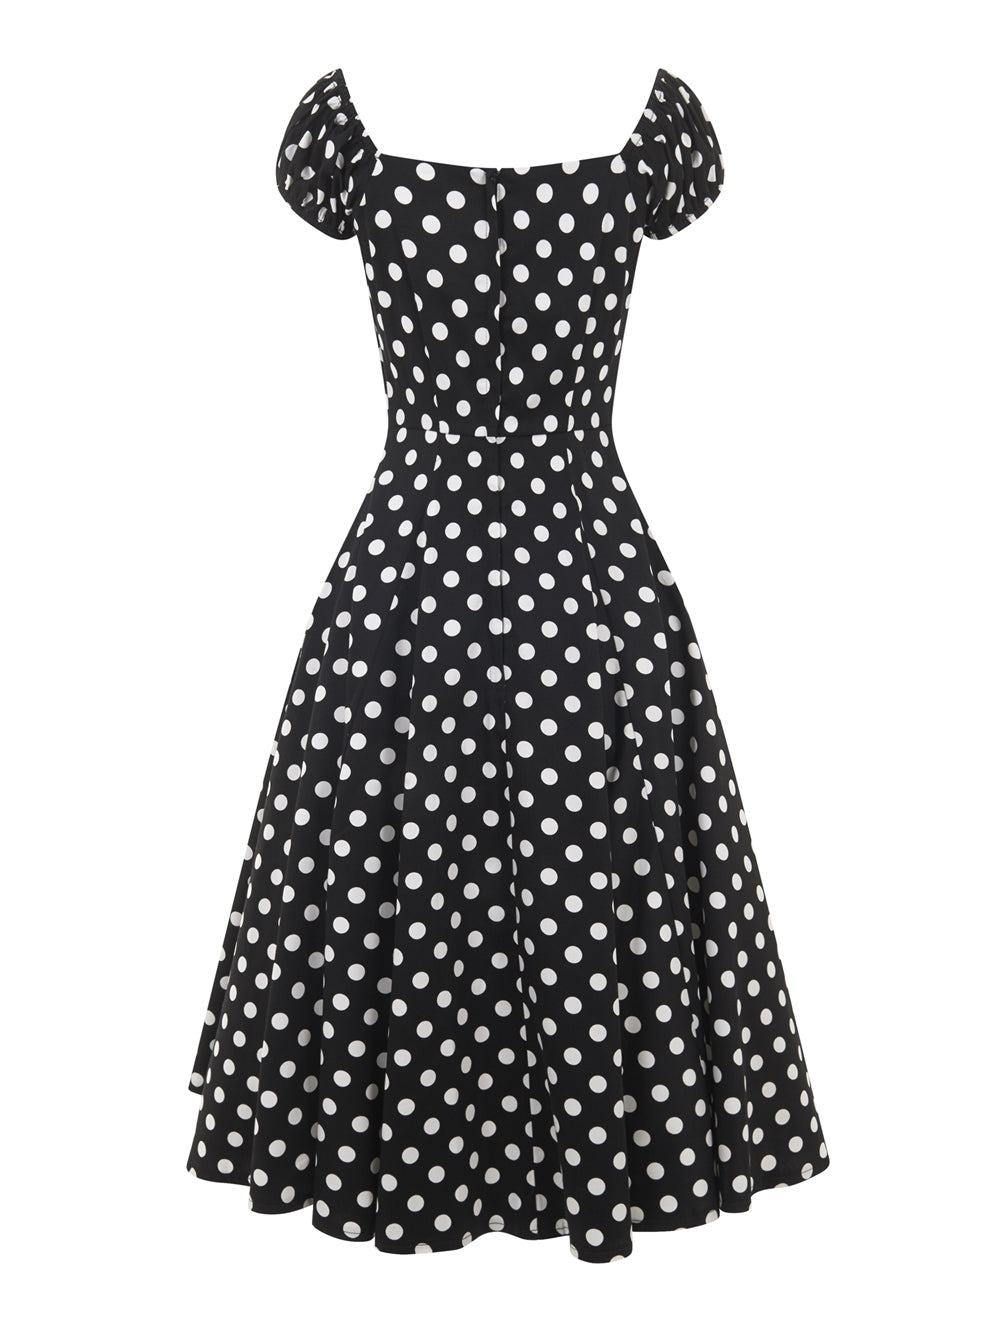 Dolores Doll Dress in Black Polka by Collectif